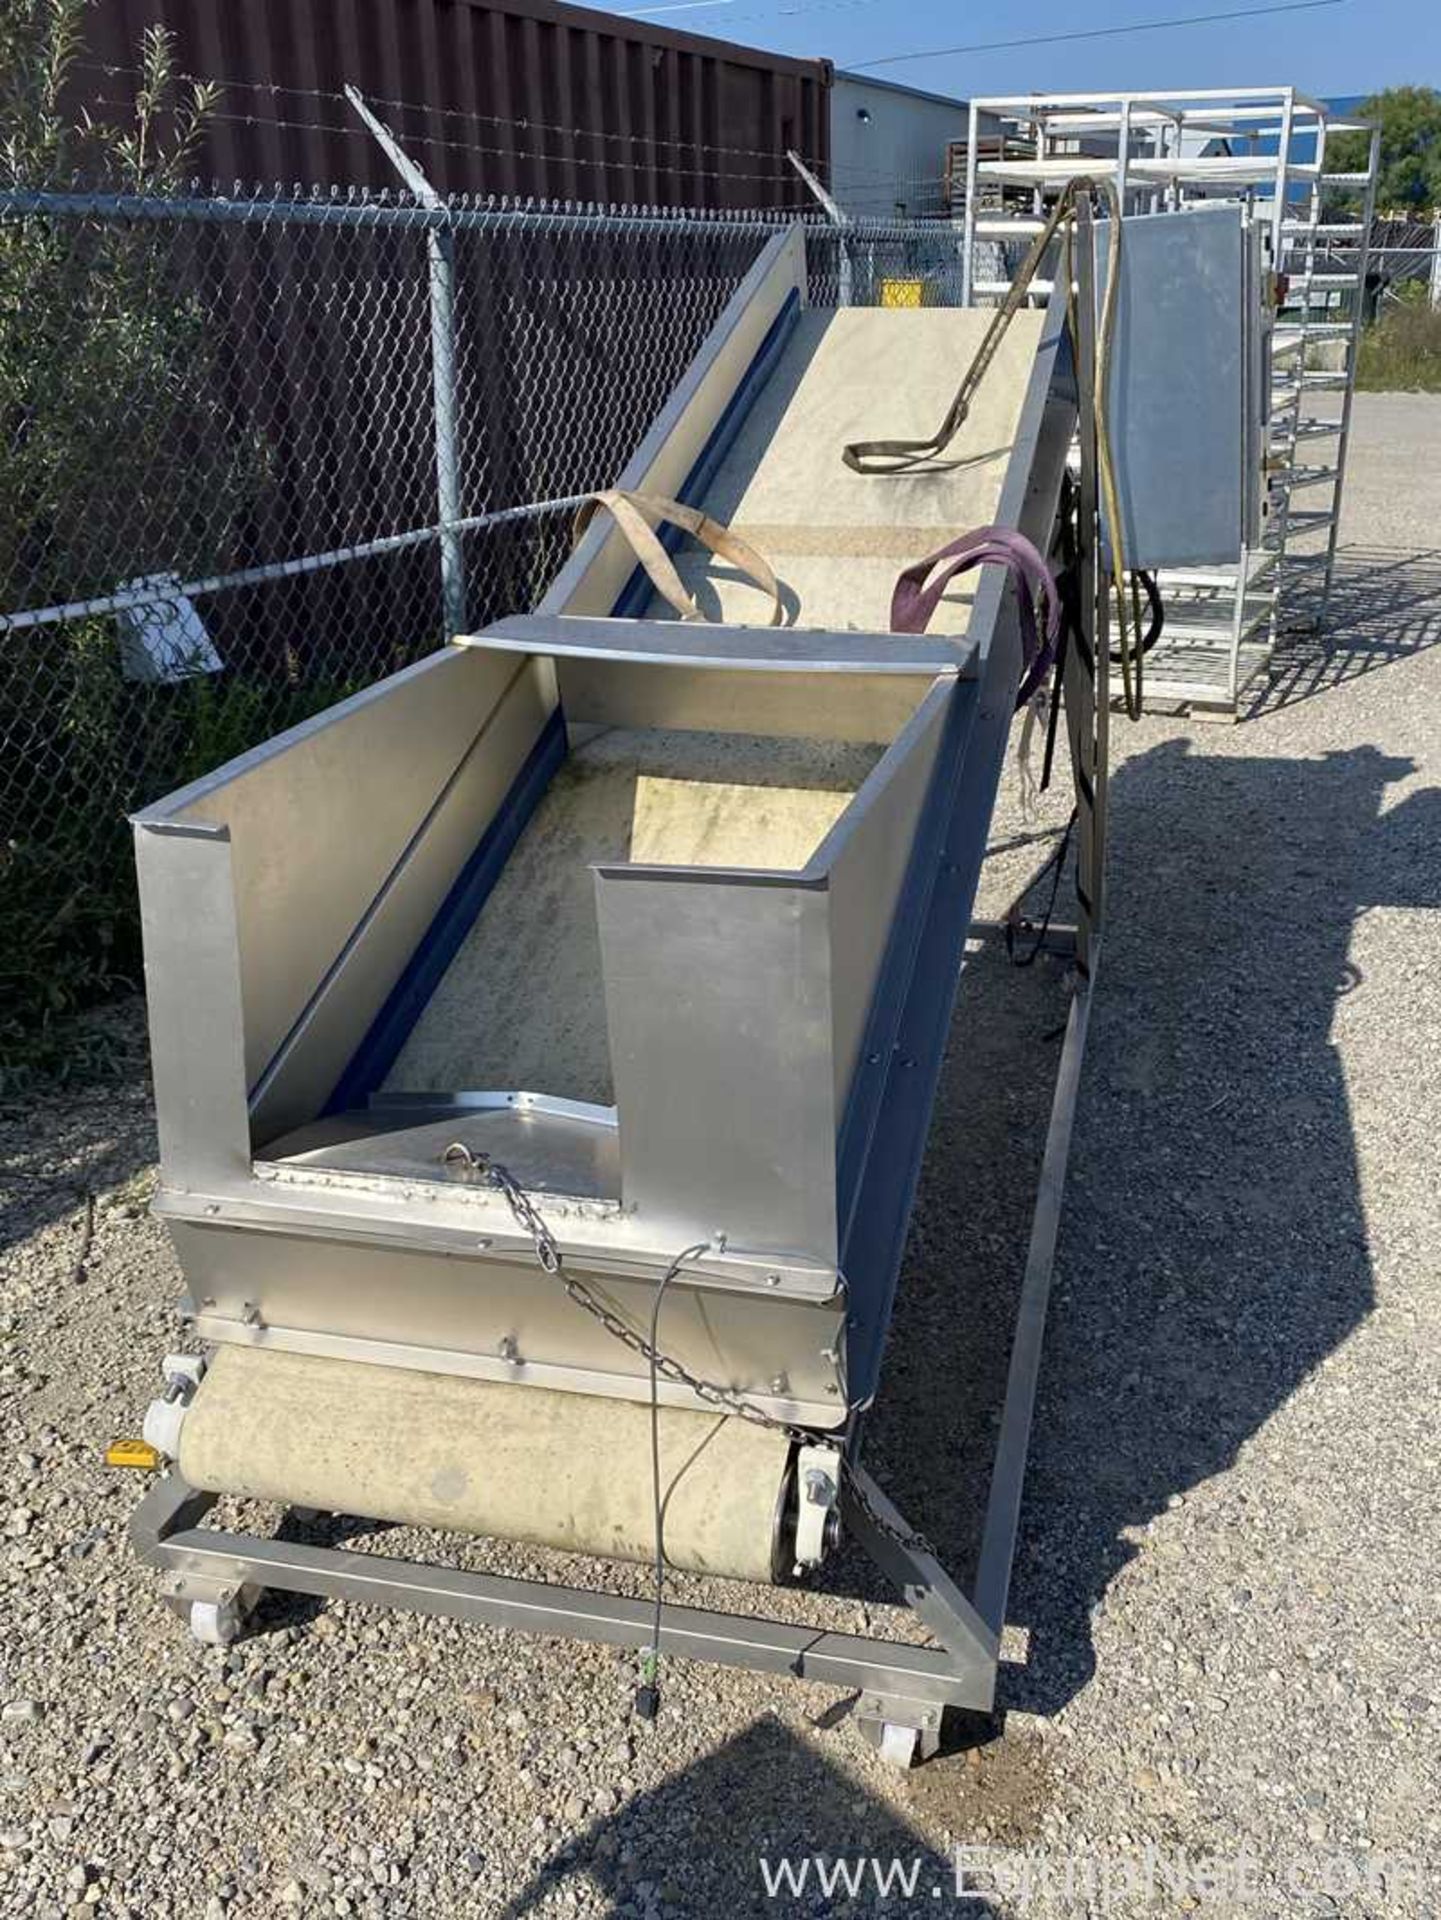 EQUIPNET LISTING #842493; REMOVAL COST: $120 ; DESCRIPTION: Stainless Steel Incline Conveyor - Image 4 of 7